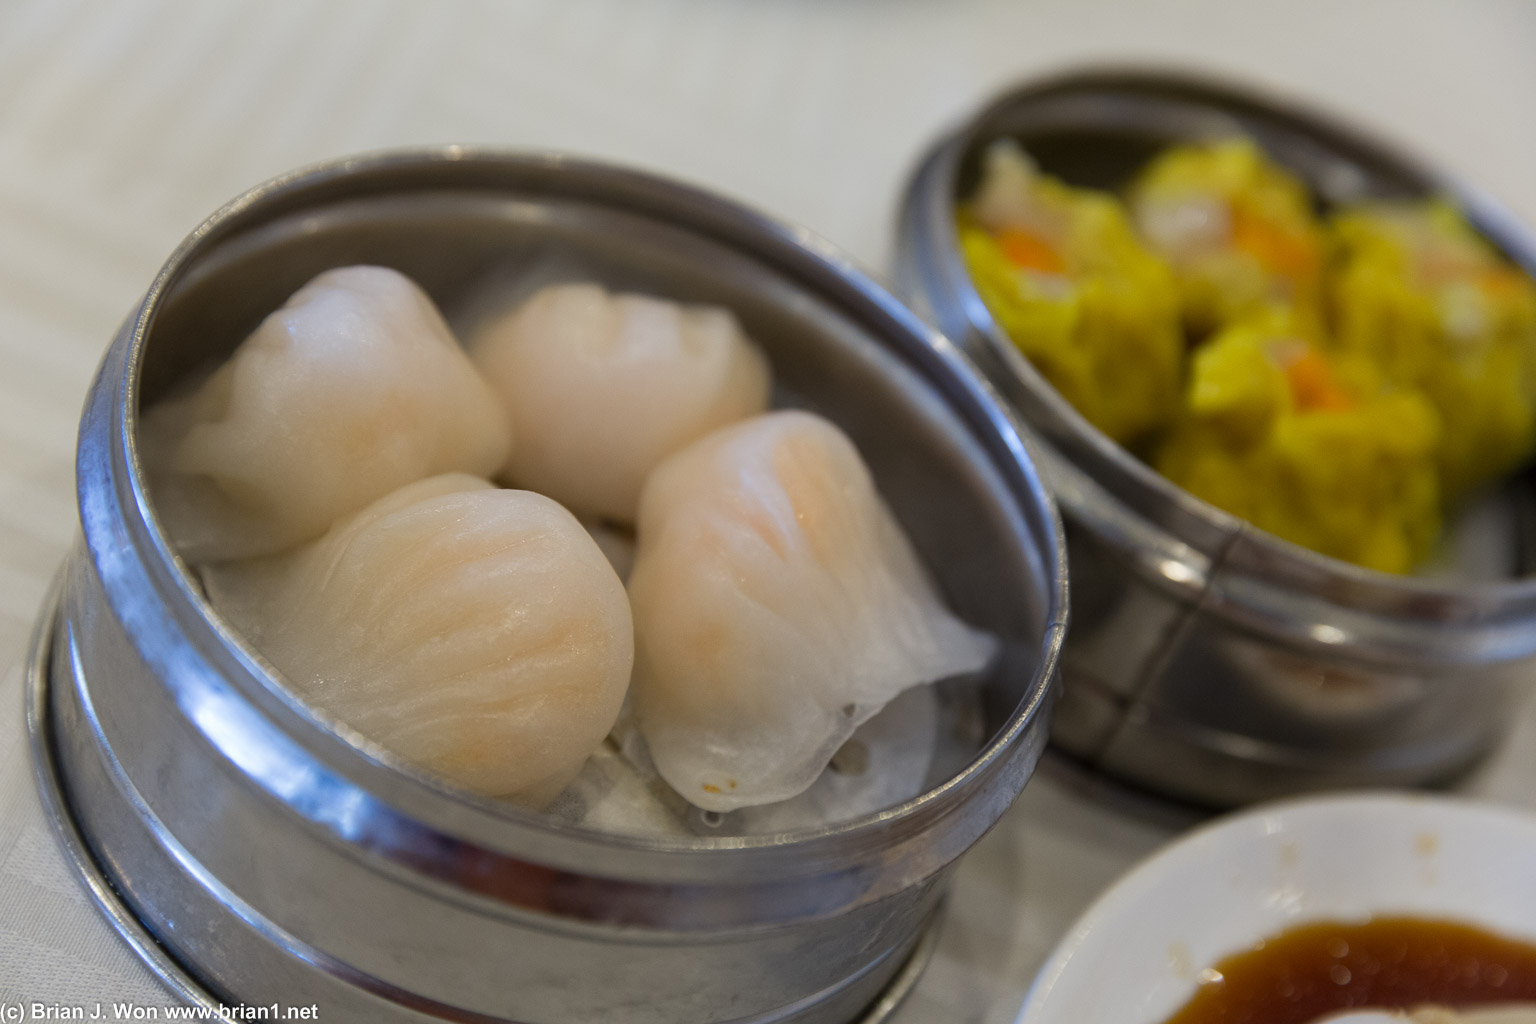 Har gow. Small-ish. Not particularly tasty, but looked delicious.